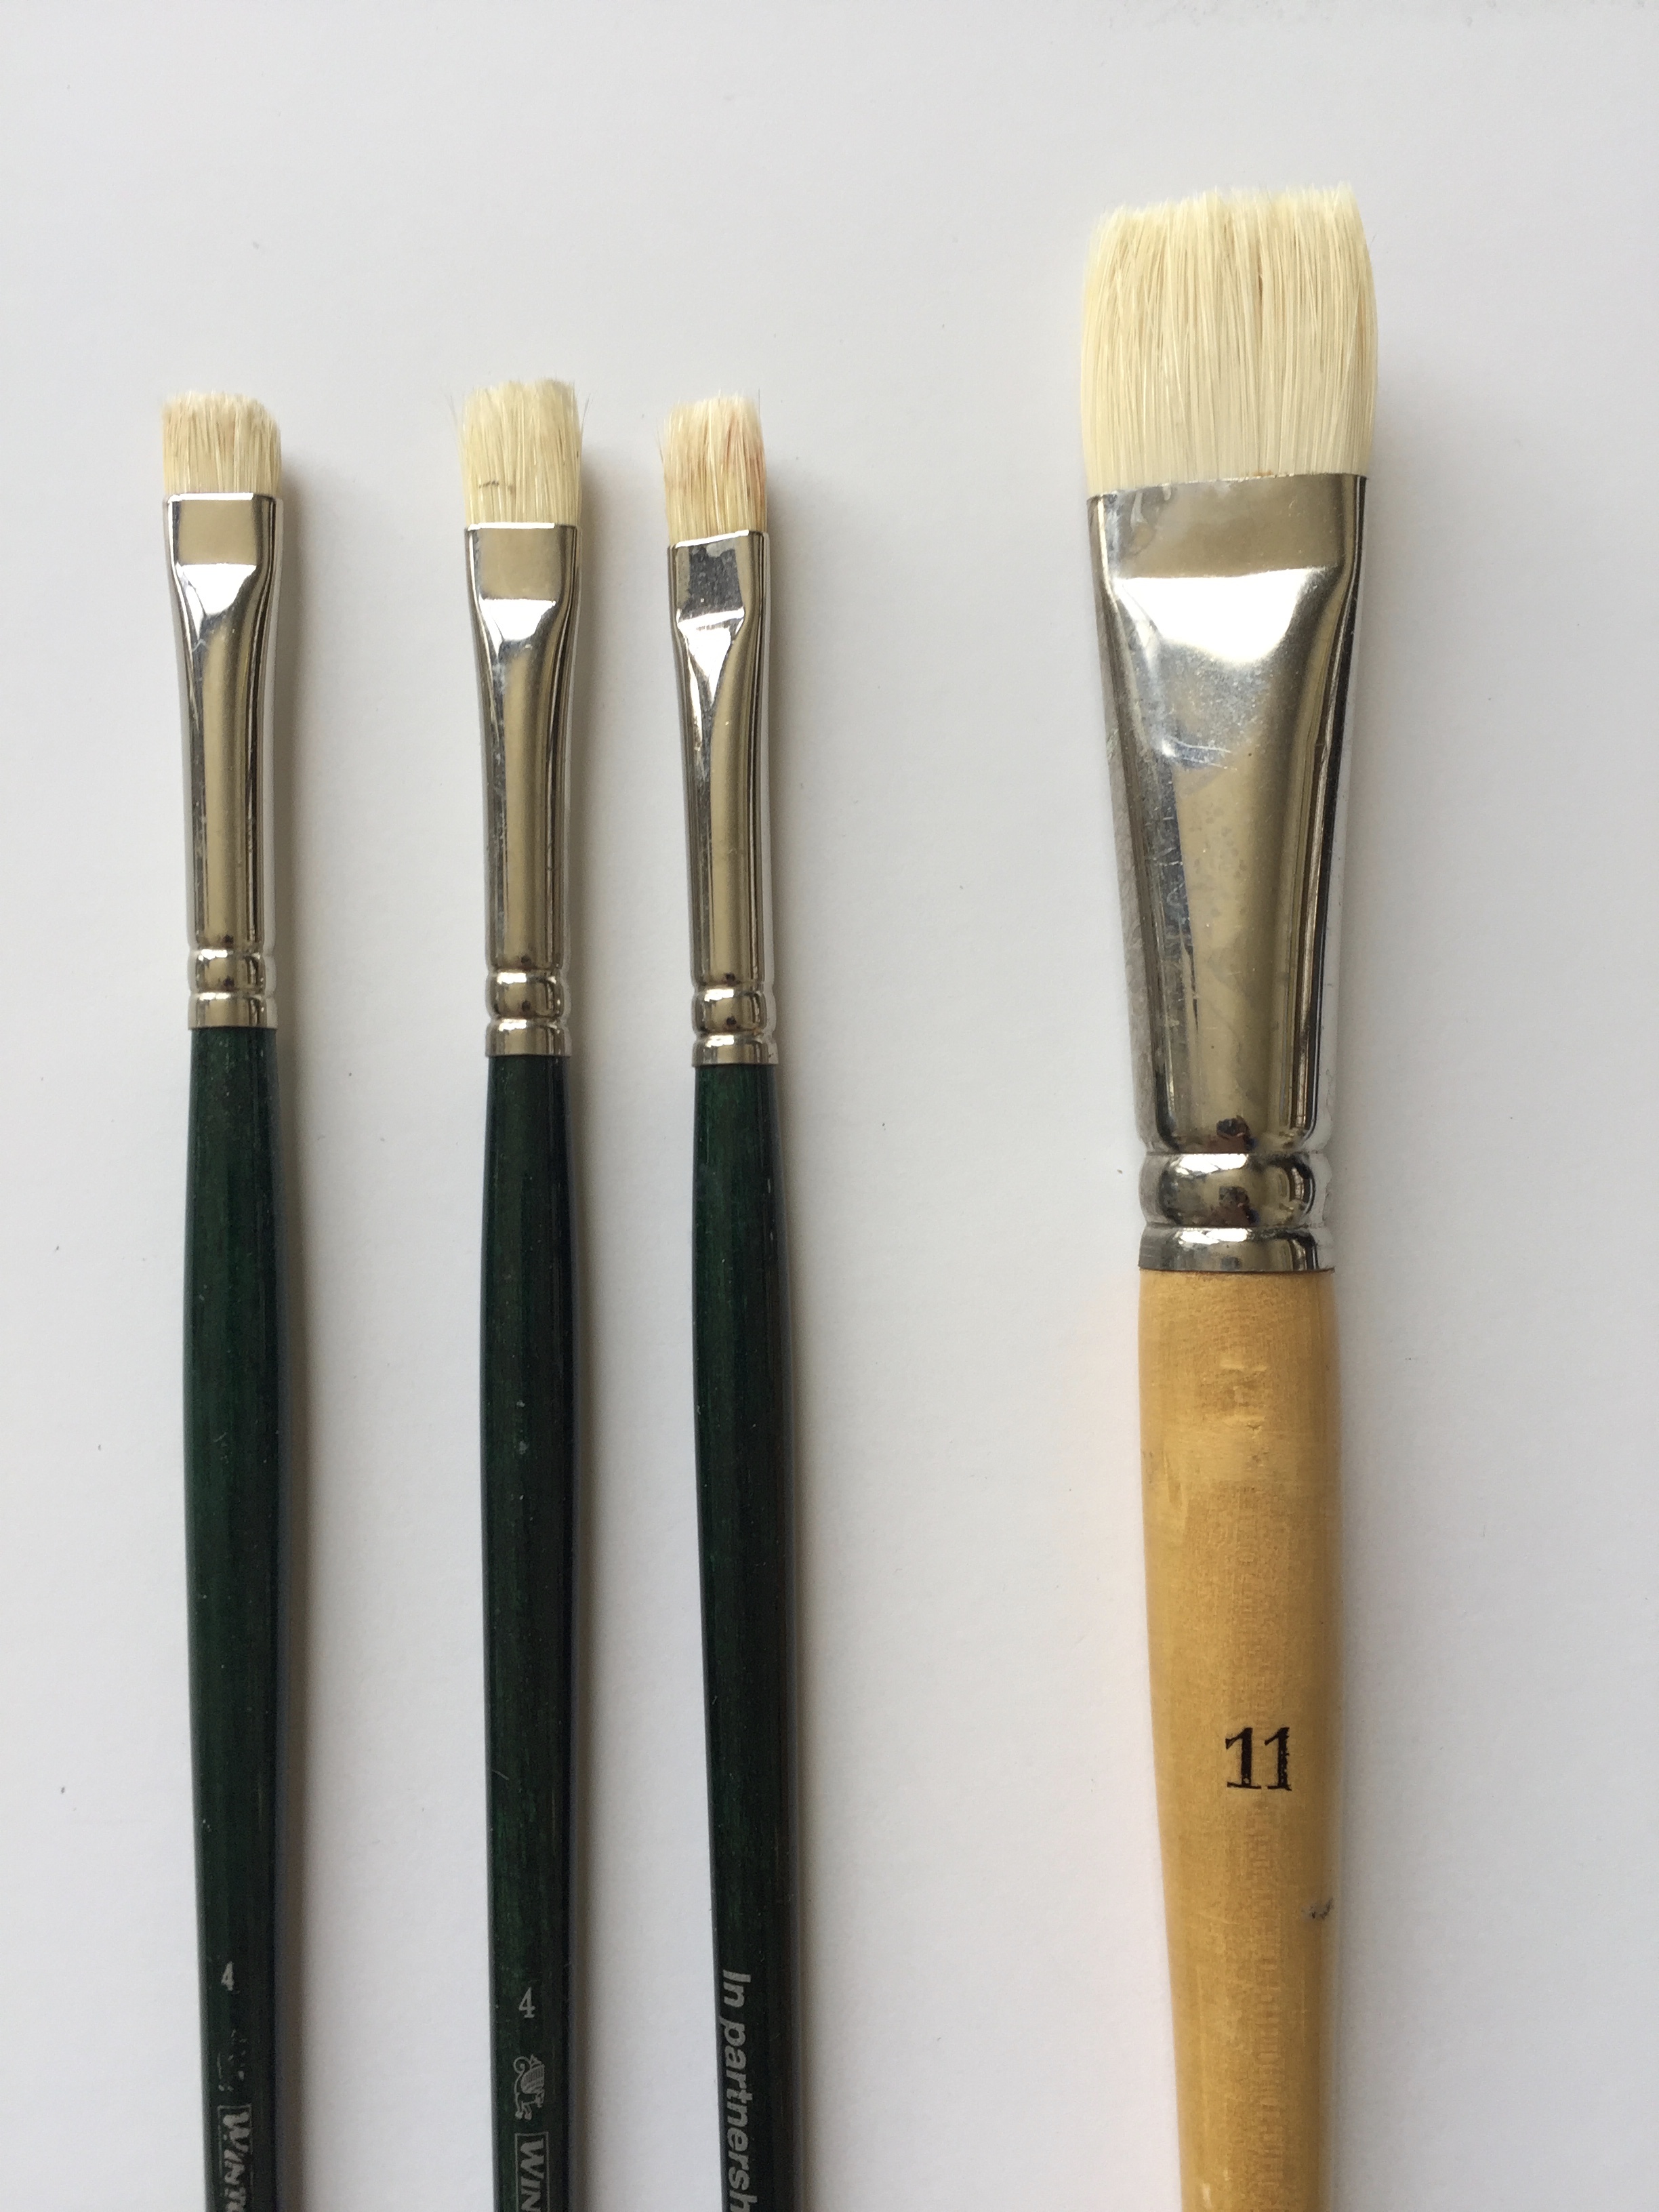 Oil Painting Brushes - Brushes for Oil Painting